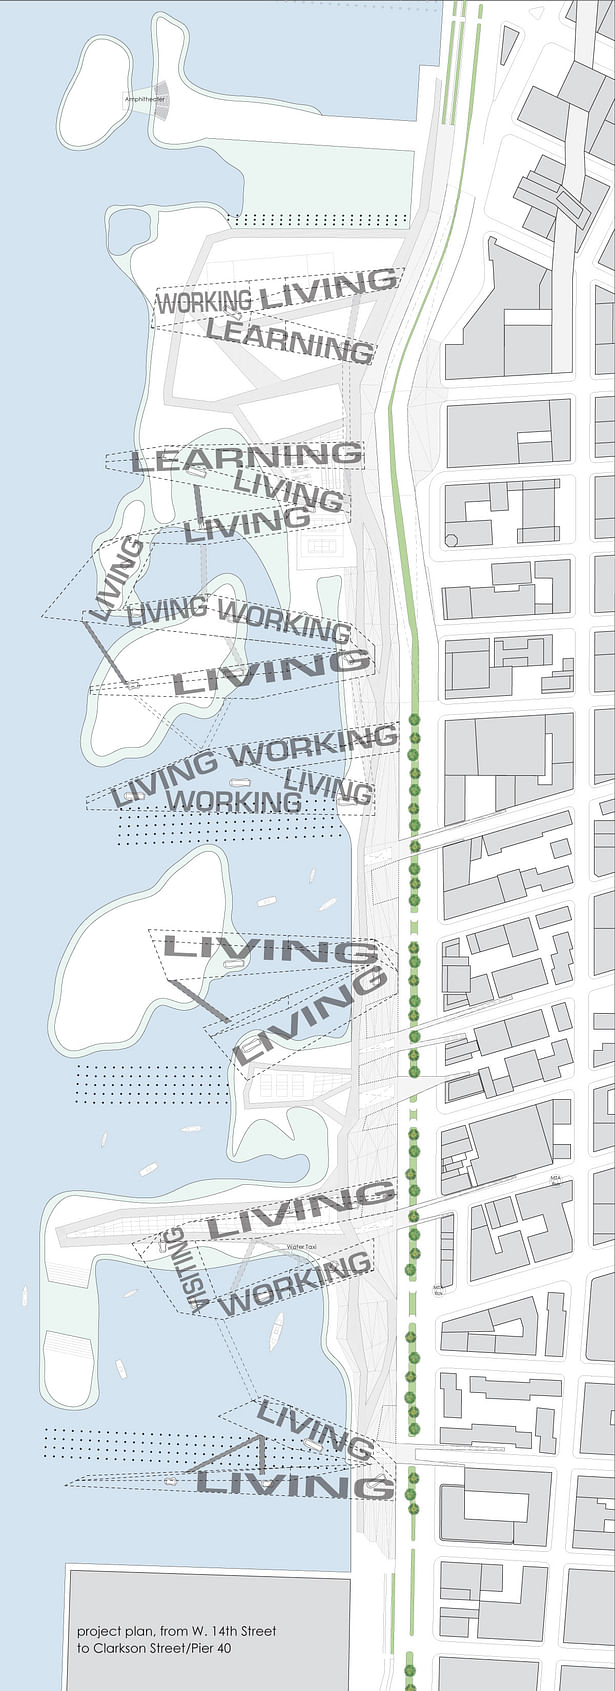 project plan from W. 14th Street to Clarkson Street/Pier 40